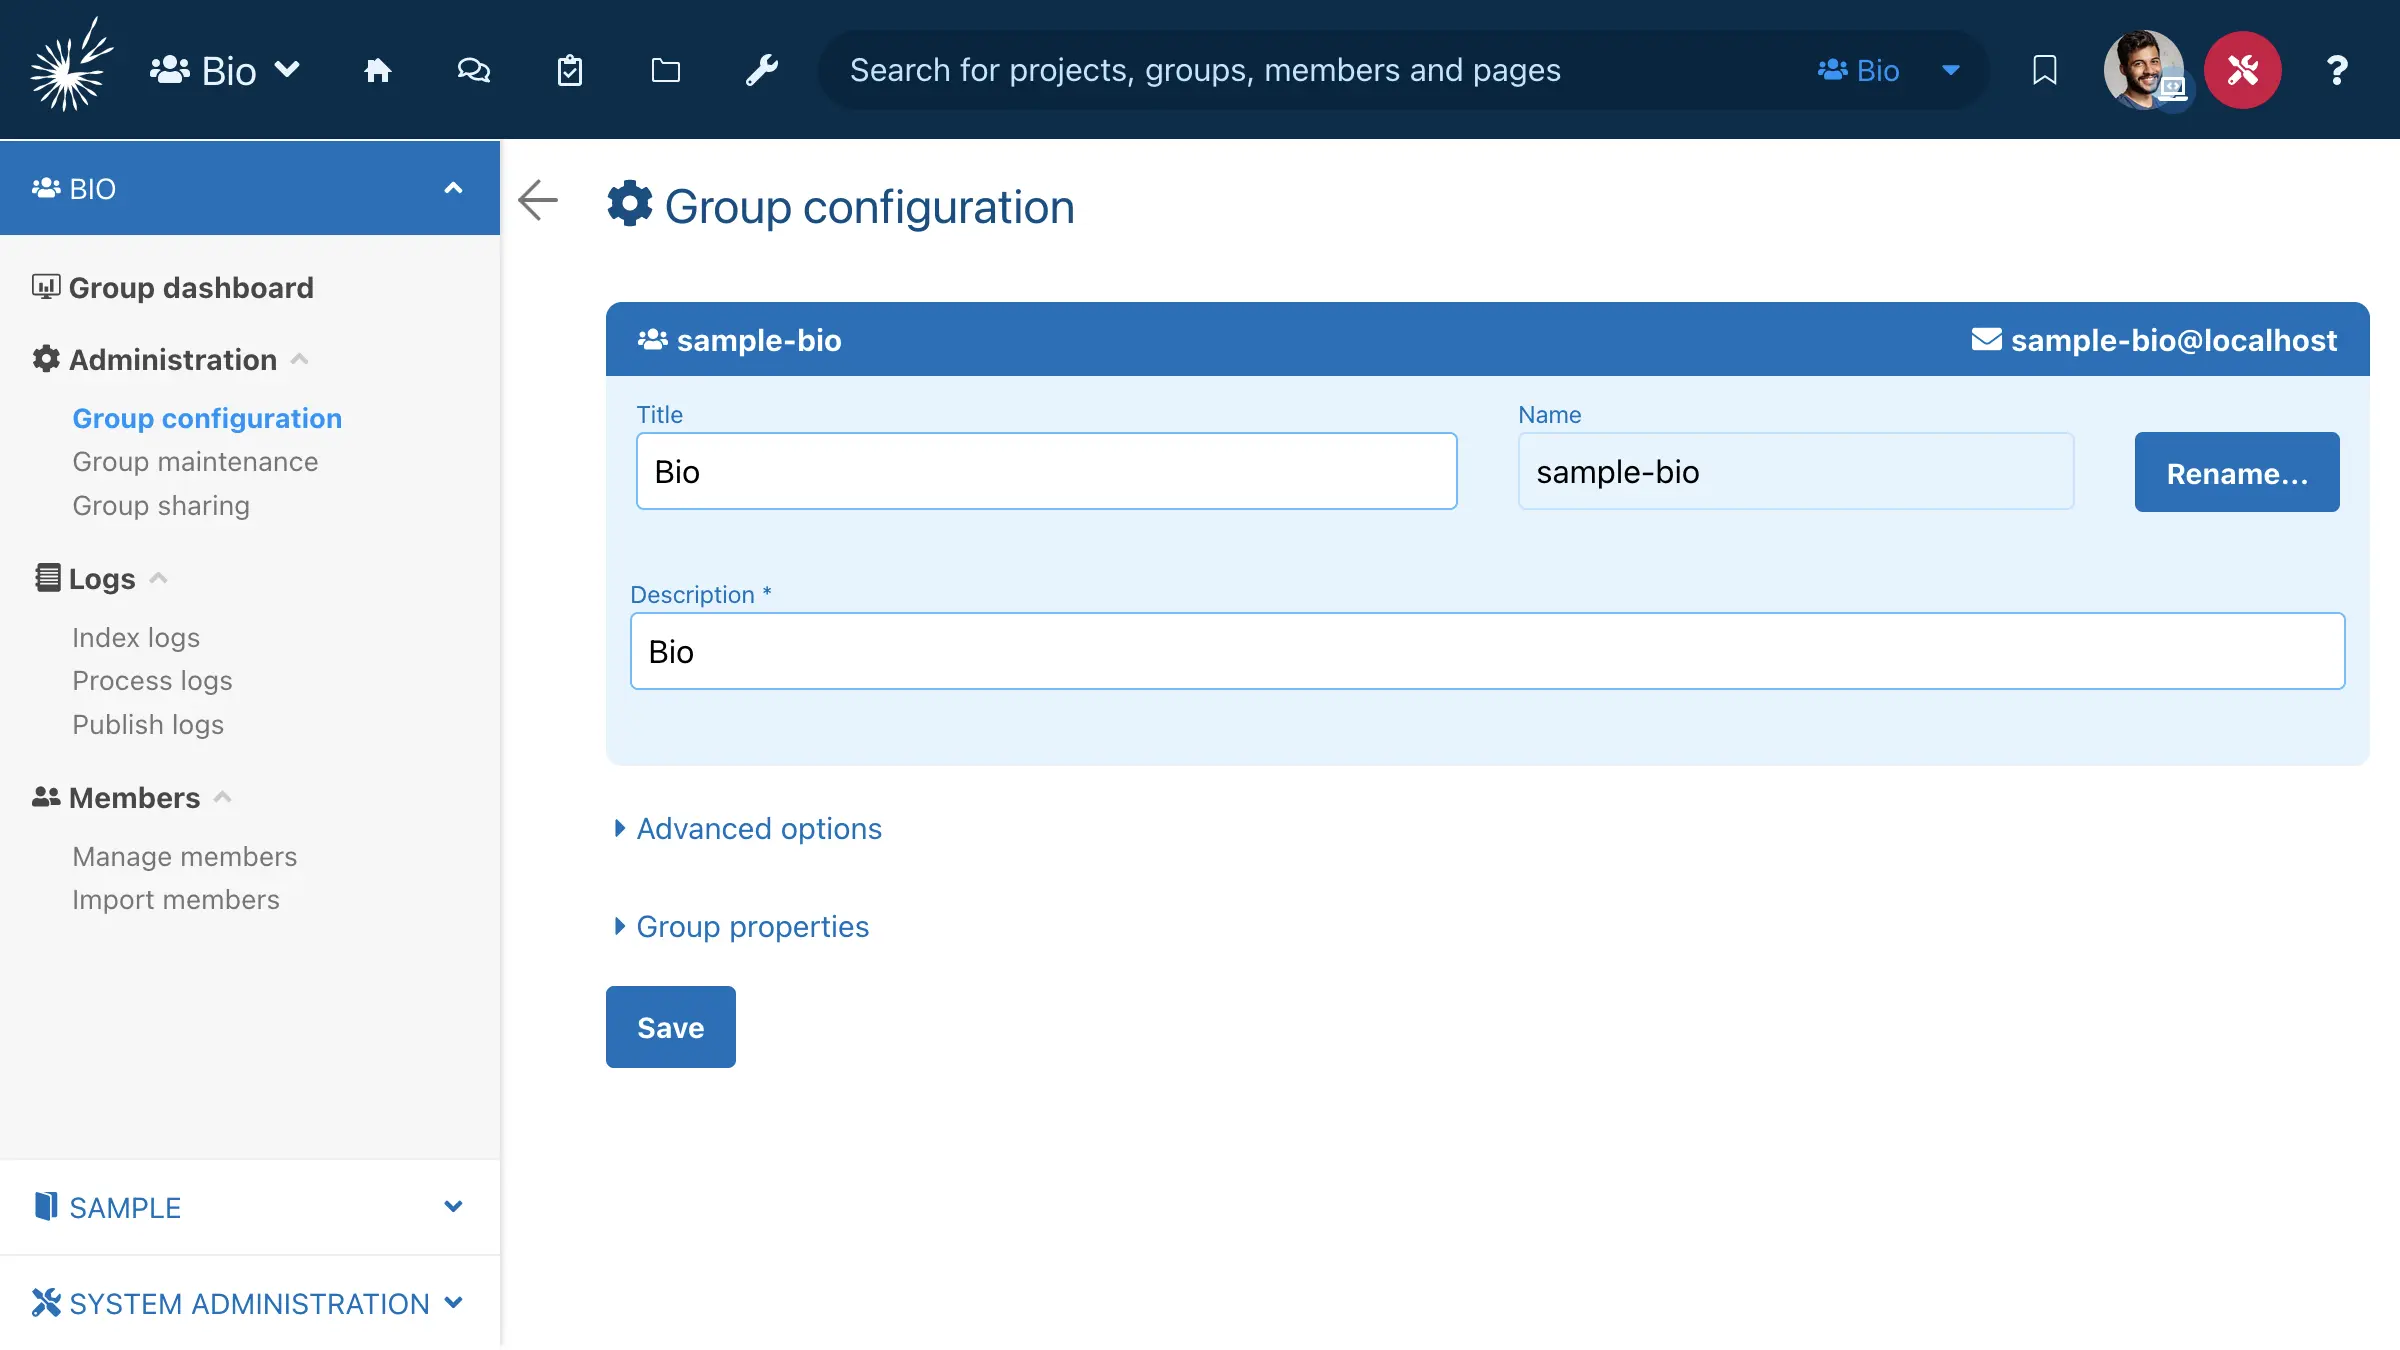 Group configuration page